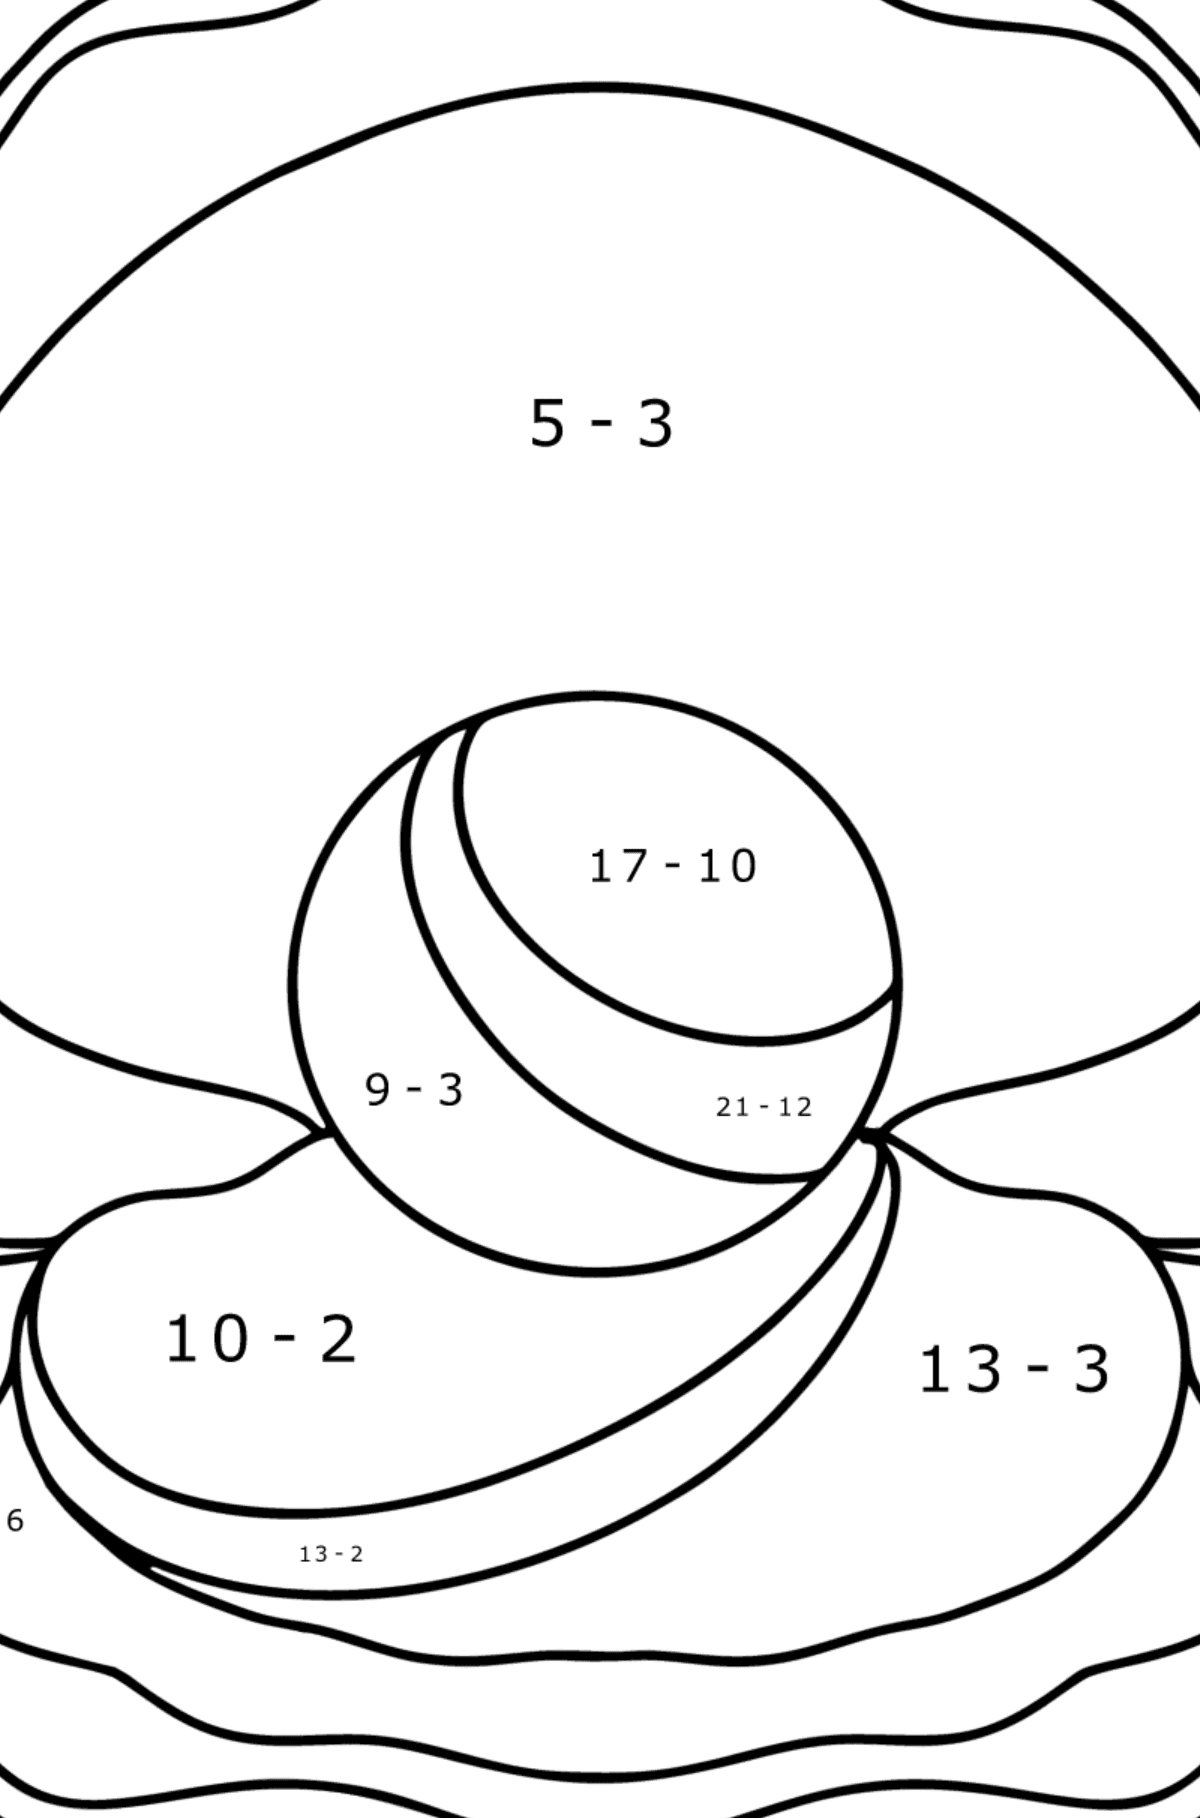 Shell with pearl coloring page - Math Coloring - Subtraction for Kids